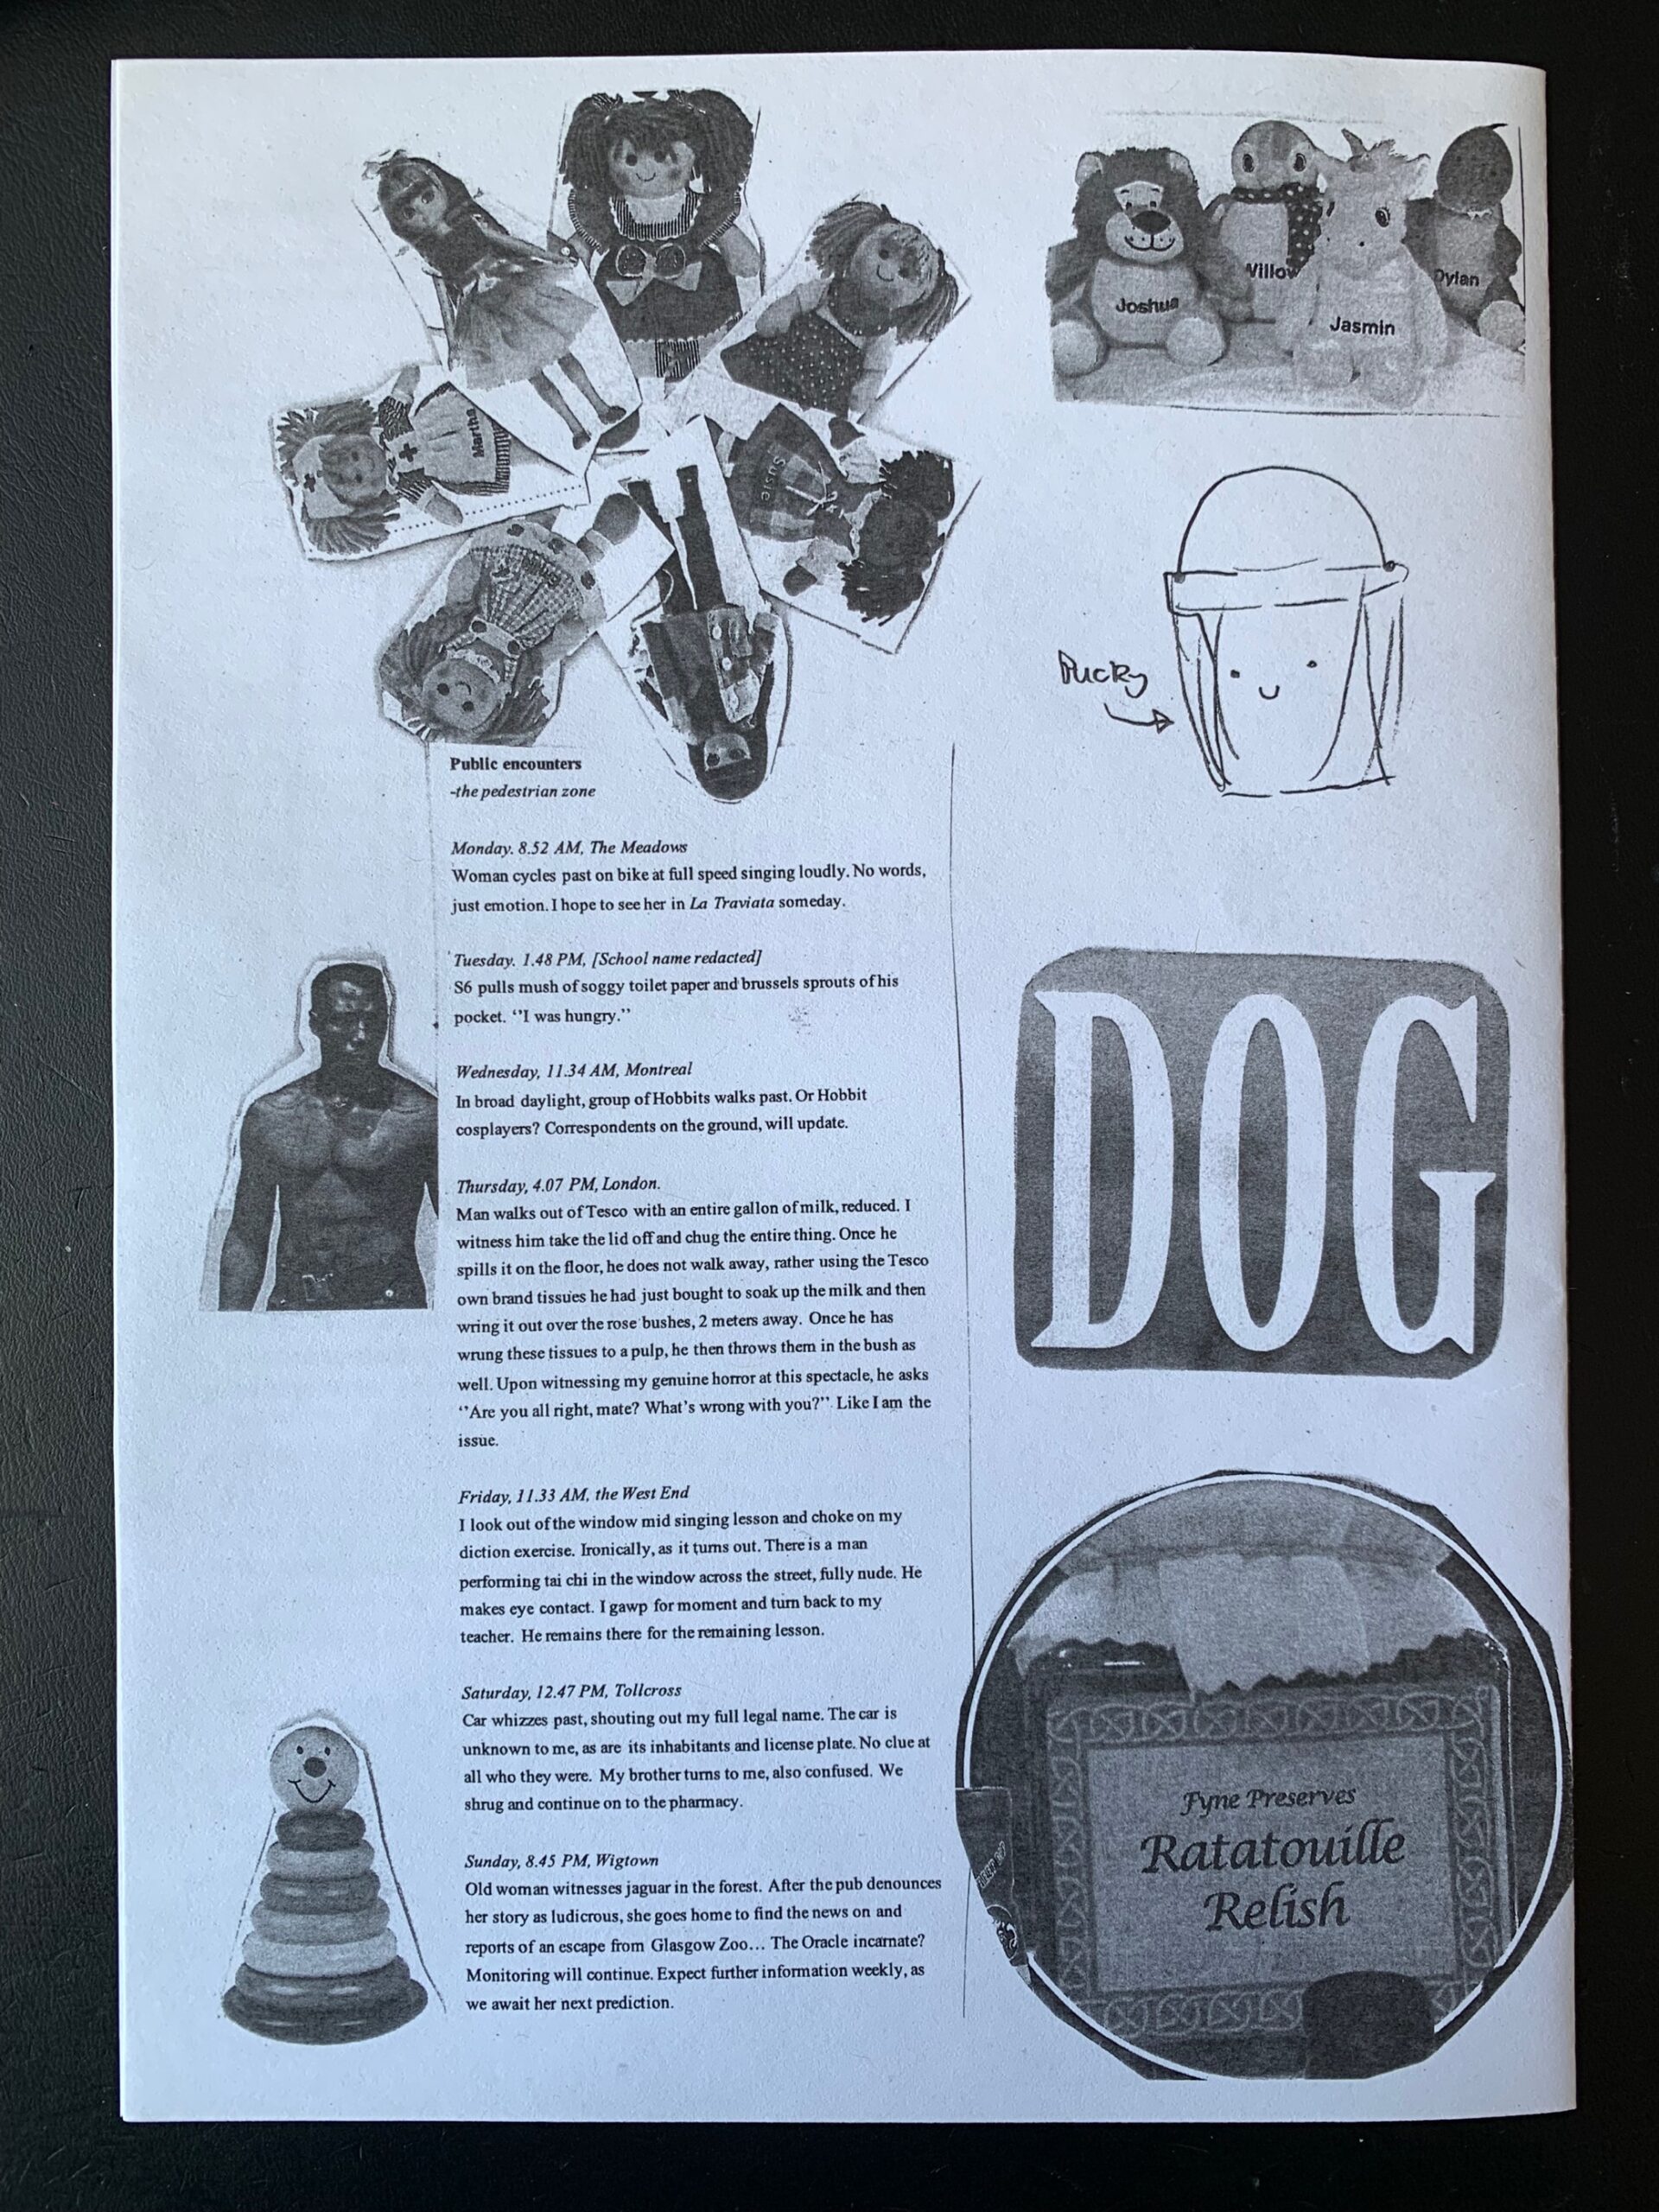 Front cover of zine with images and text in black and white